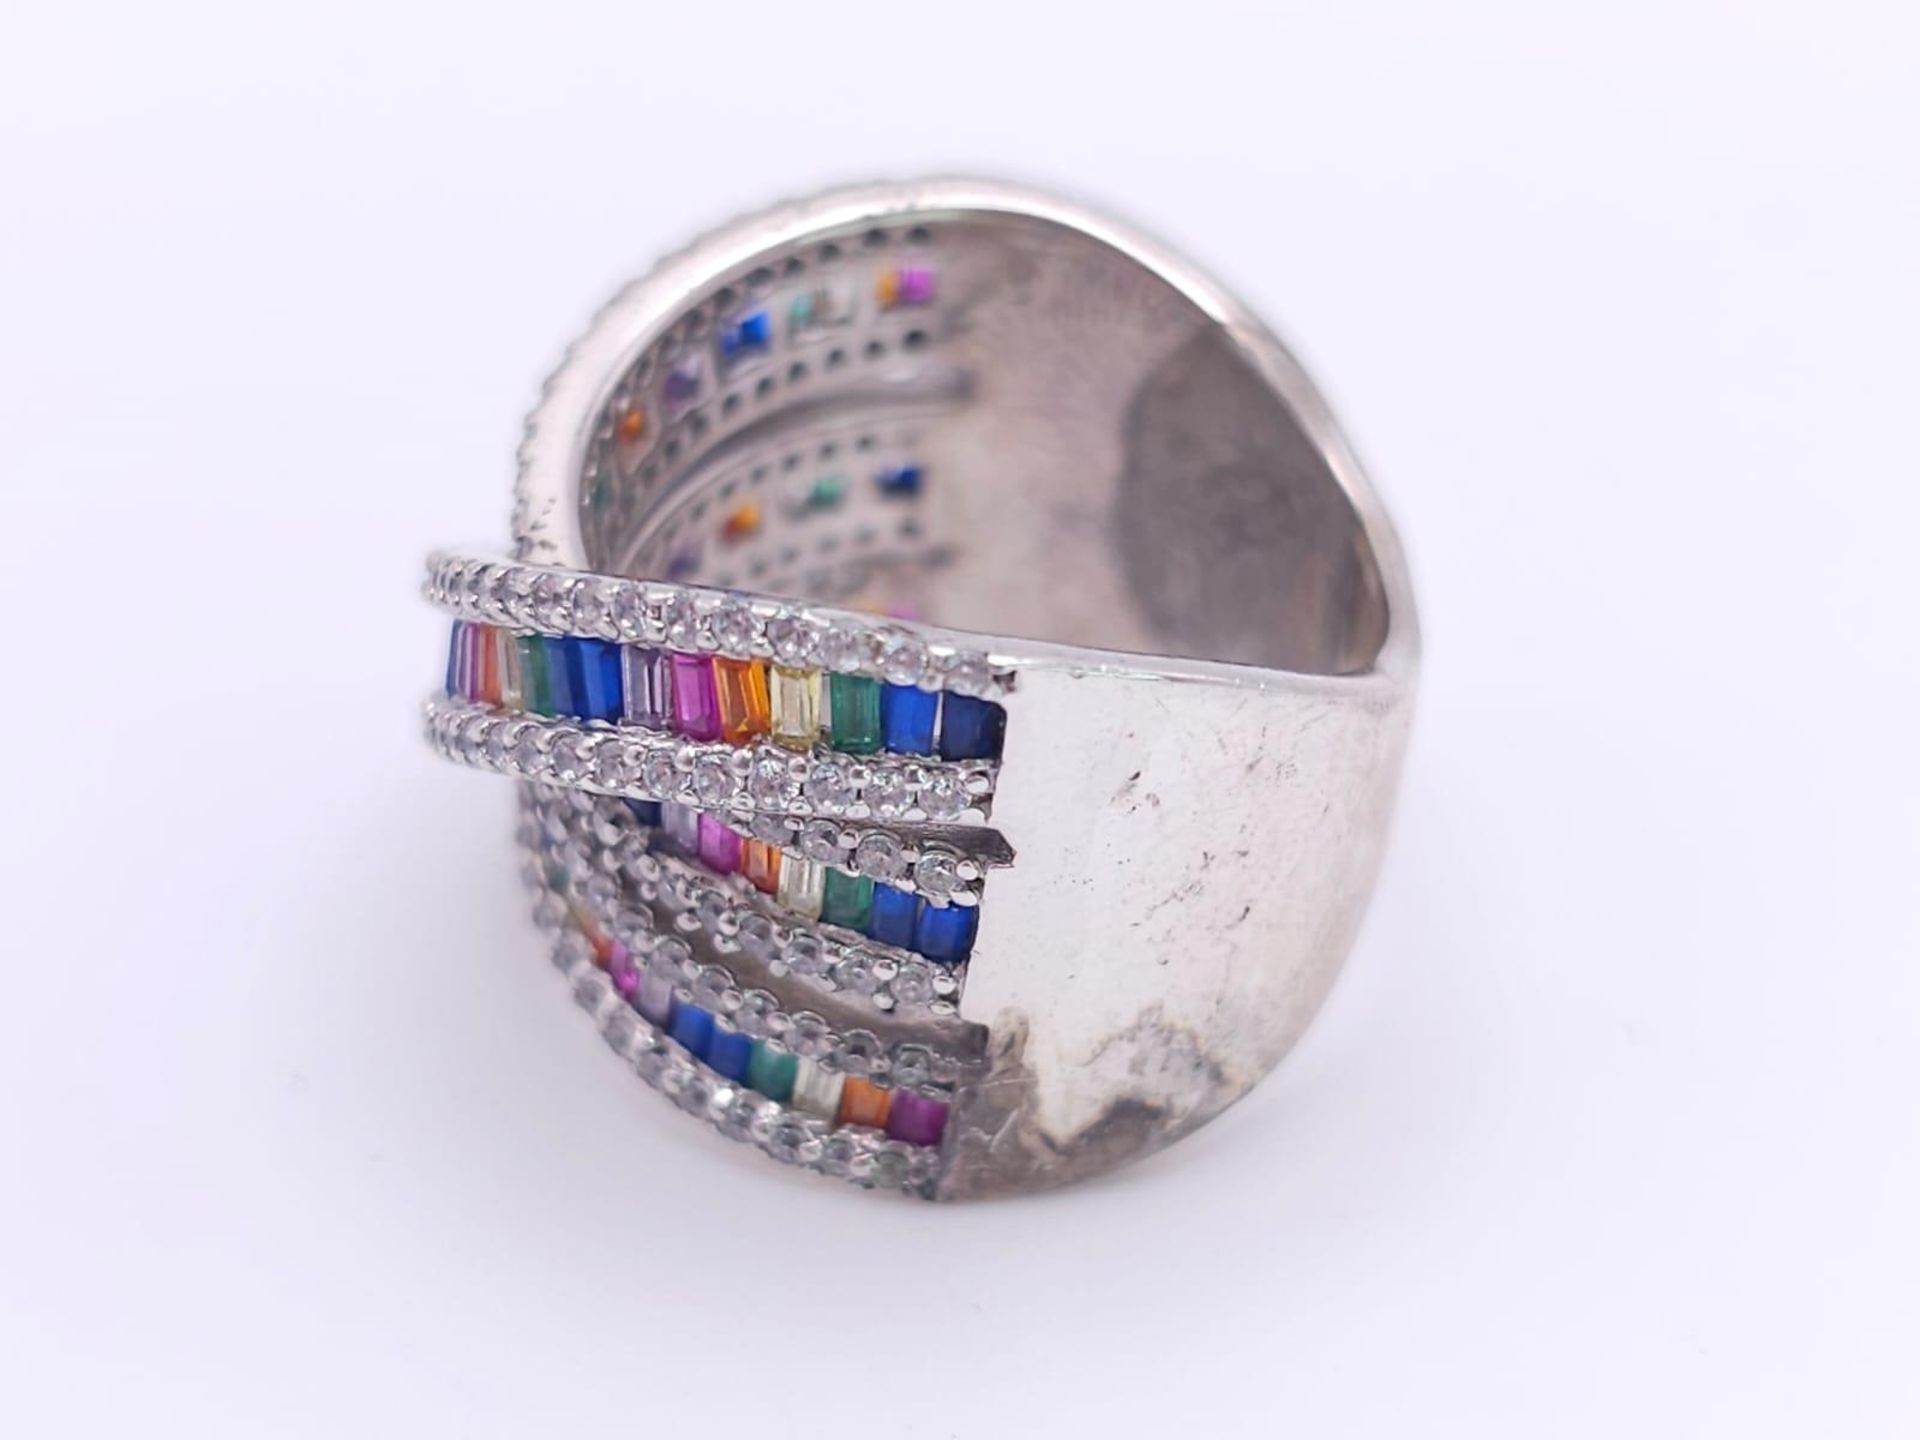 Three Different Style Fancy Sterling Silver Rings - 2 x P, 1 x N. 21.2g total weight. Ref: 016551. - Image 5 of 19